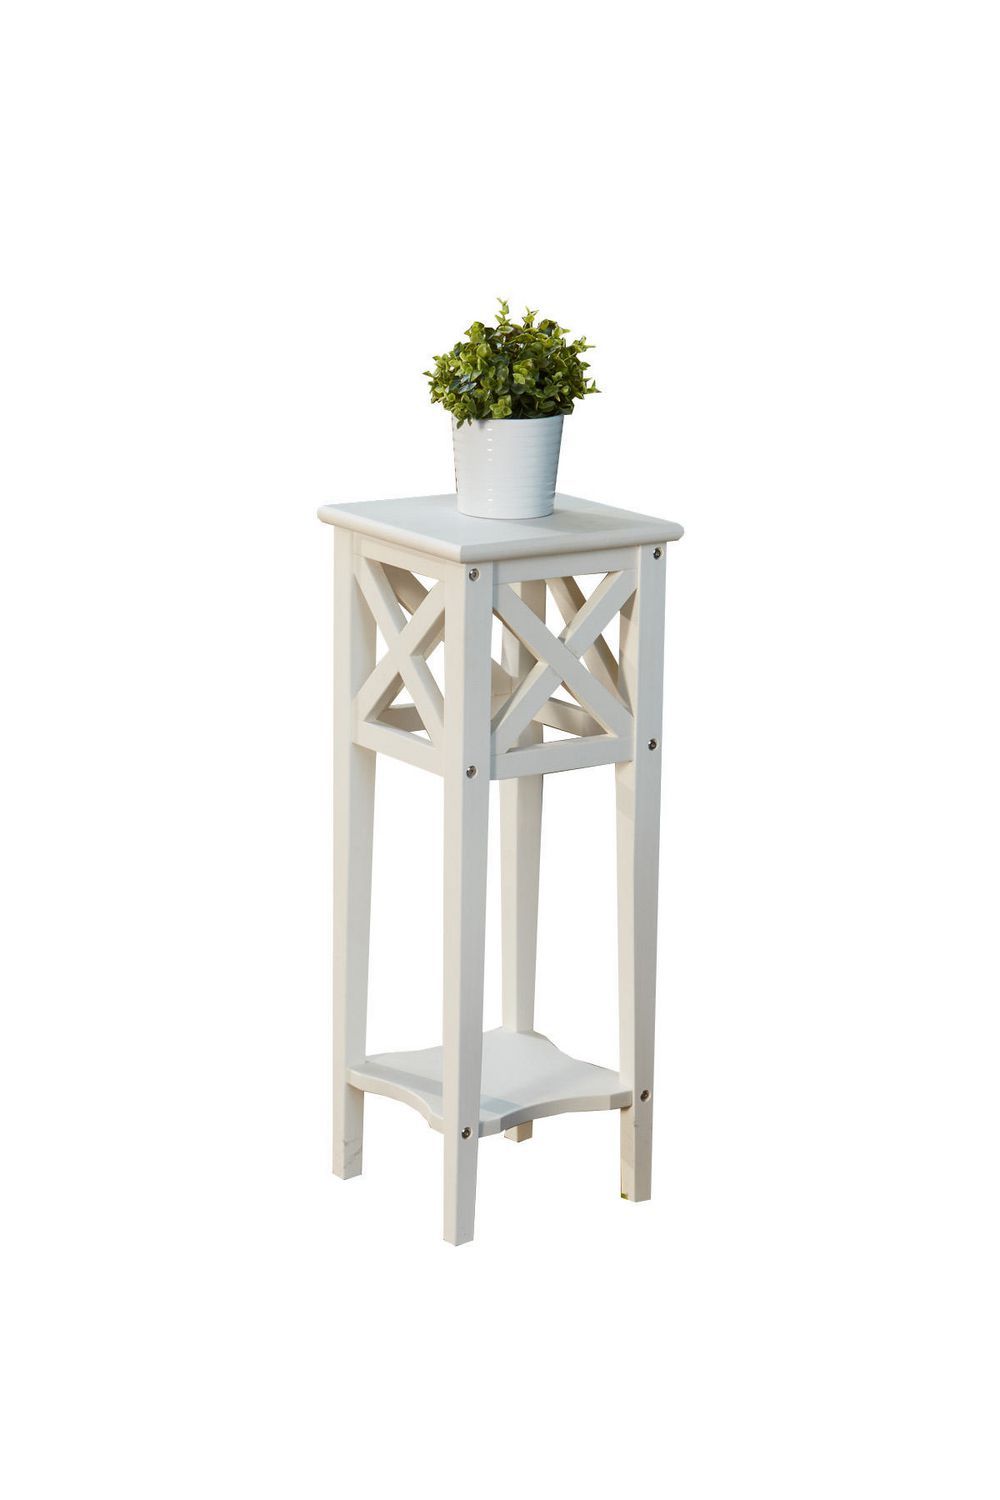 Leisure Design White Ivy Plant Stand | Walmart Canada With Regard To Ivory Plant Stands (View 6 of 15)